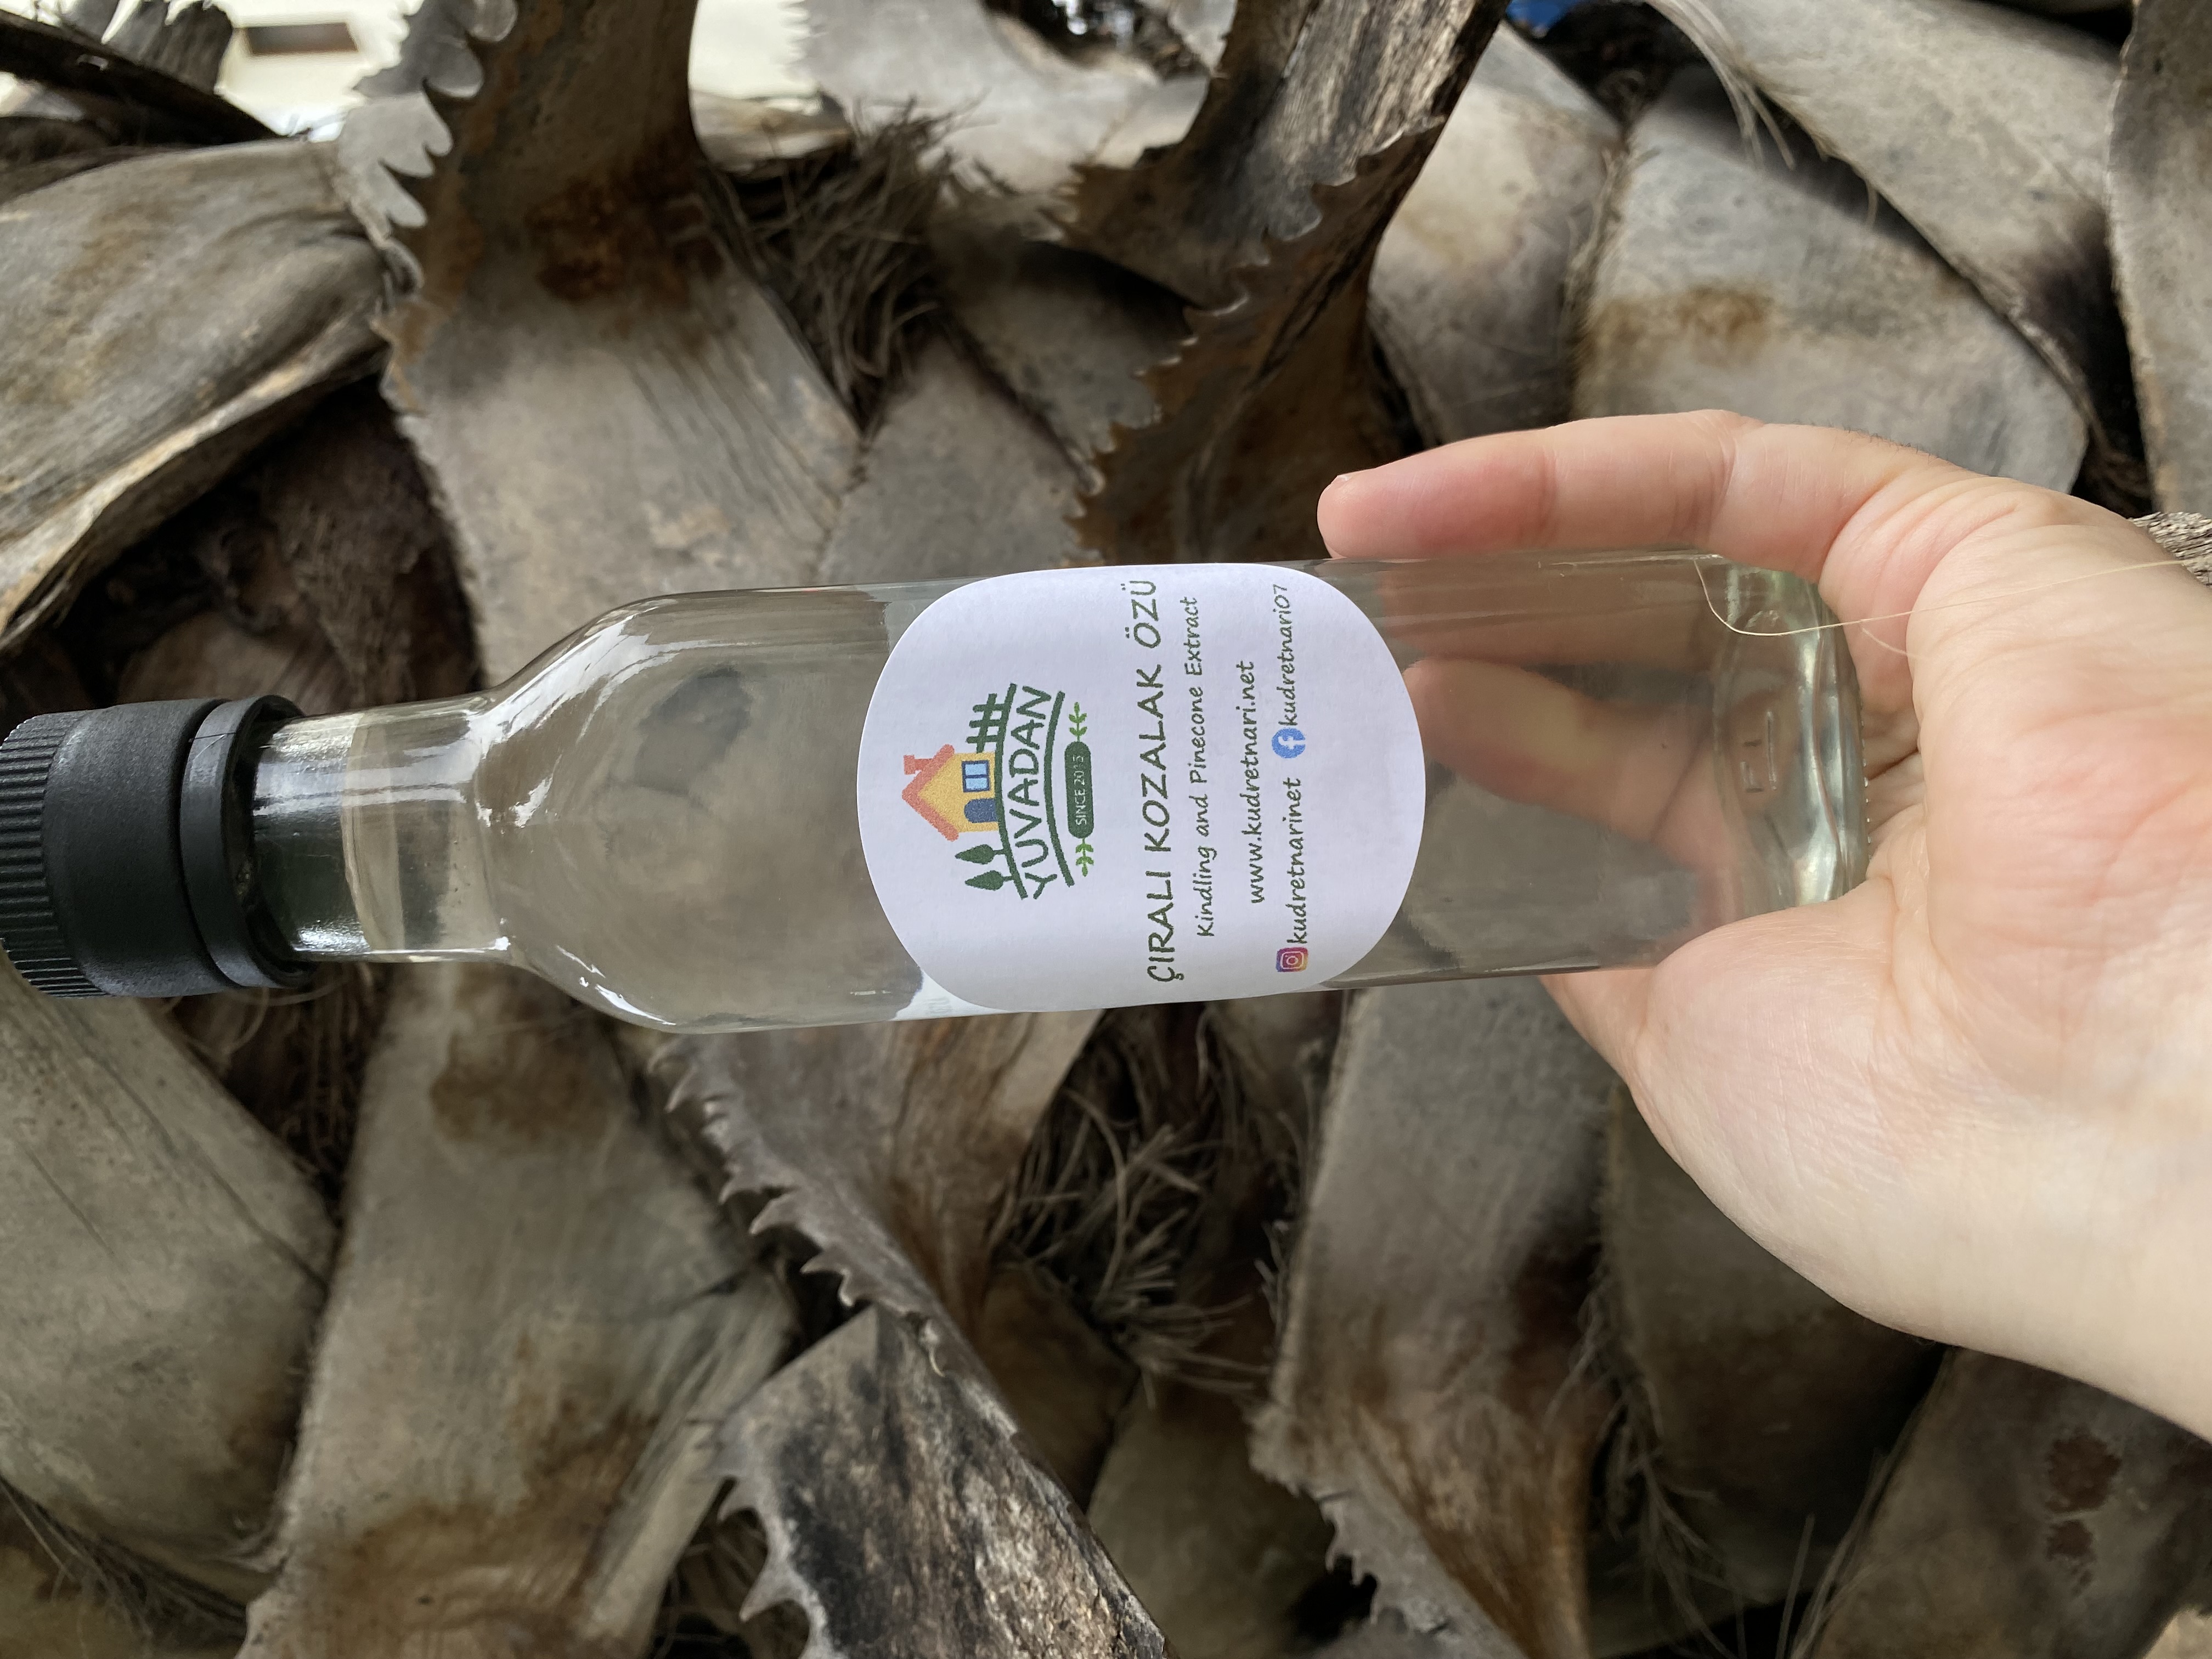 Kindling%20Pine%20Cone%20Extract%20-%20Kindling%20Pine%20Cone%20Syrup%20-%20Kindling%20Pine%20Cone%20Extract%20-%20Pine%20Cone%20Juice